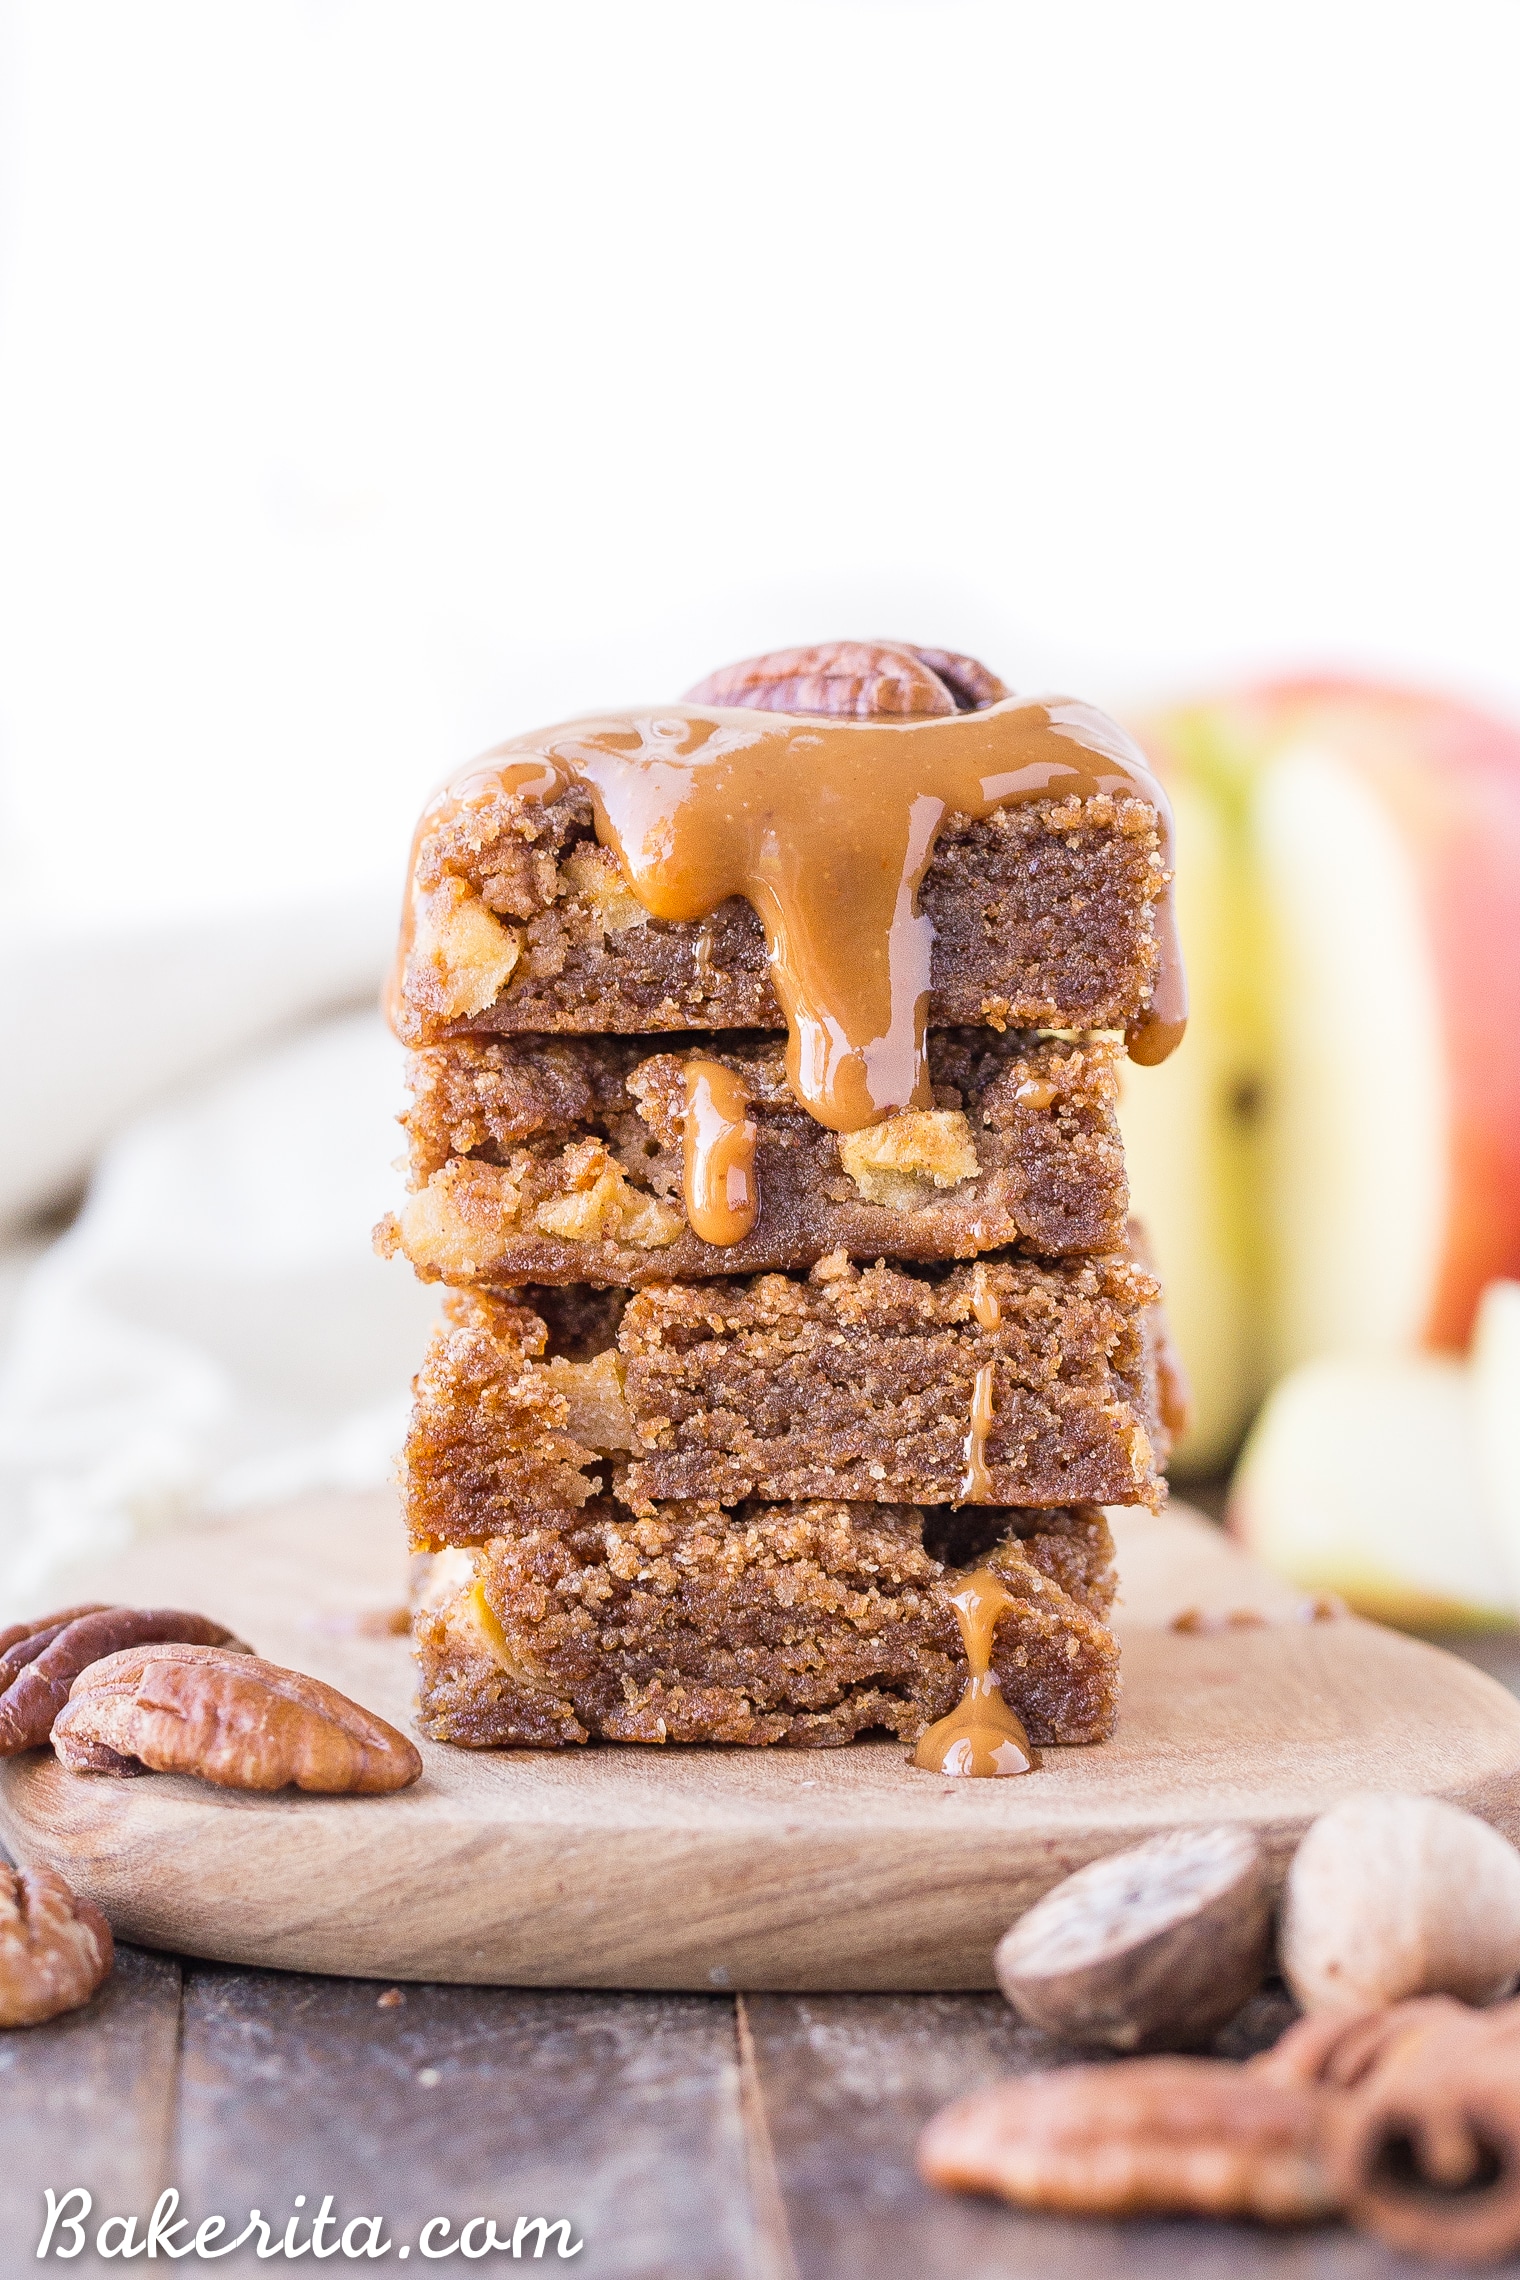 These Apple Blondies are full of warm spices and topped with an absolutely scrumptious (and SUPER easy) caramel glaze. These chewy, soft apple blondies are gluten-free, paleo and vegan.